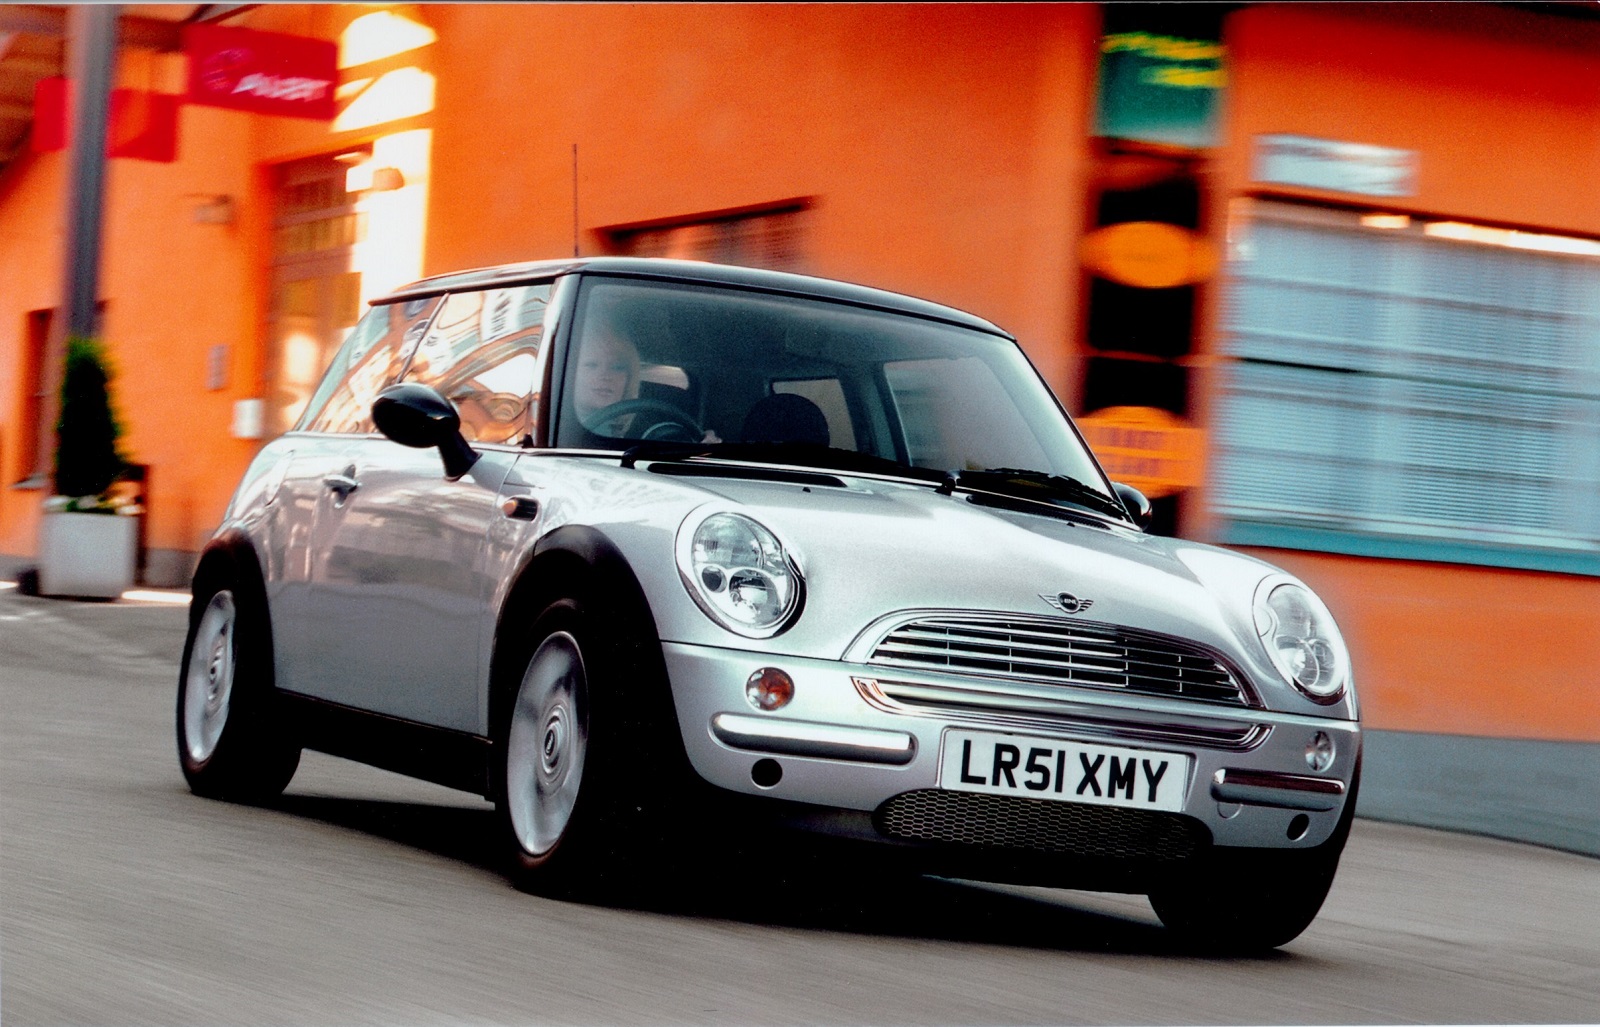 <p><strong>Issigonis’ original</strong> Mini in its simplest two-door form sold more than 5.3 million, including the rapid Cooper models. BMW took a risk reviving the MINI brand in 2001 with its modern interpretation of the much-loved classic small car (pictured). It was a <strong>gamble that has paid off</strong> handsomely thanks to more than 5 million sales to date of the new hatch models (including convertible, electric and five-door versions).</p><p>Agile handling, sharp steering and great looks all contribute, and just like the original, the feisty Cooper versions rack up plenty of sales.</p>